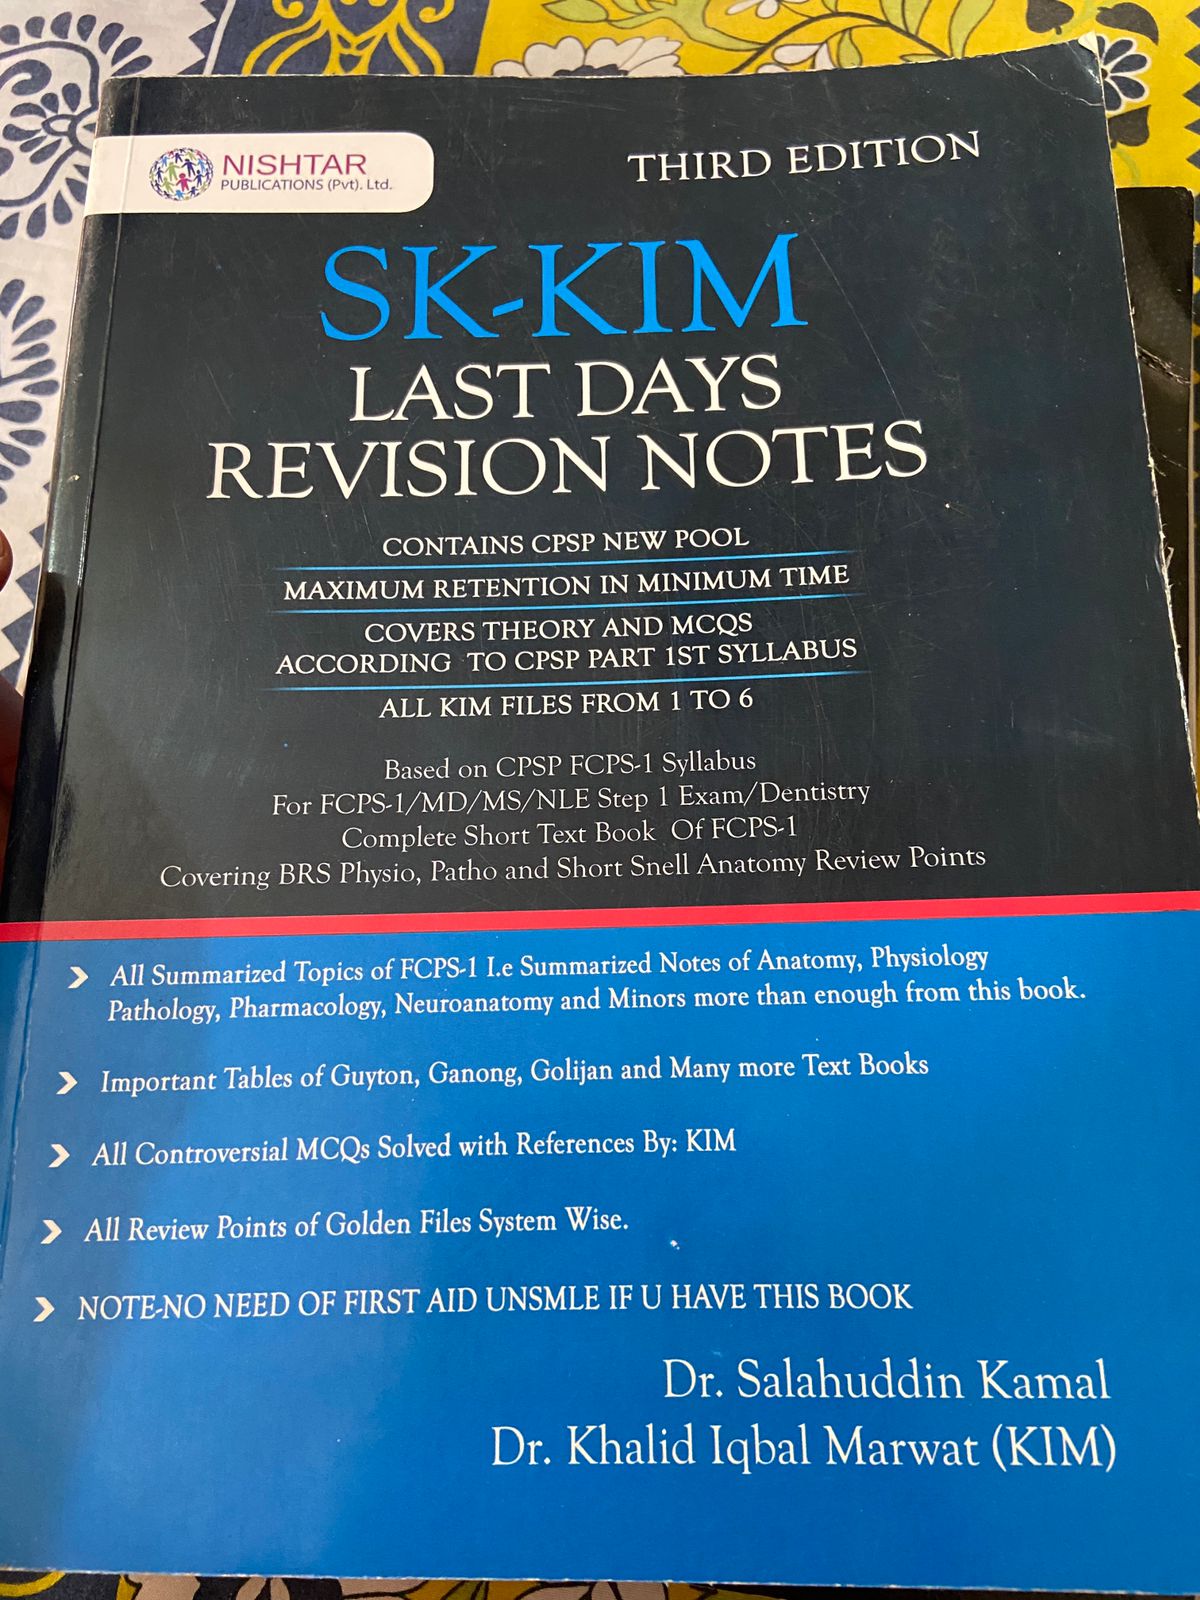 sk-kim last days revision notes3rd edition